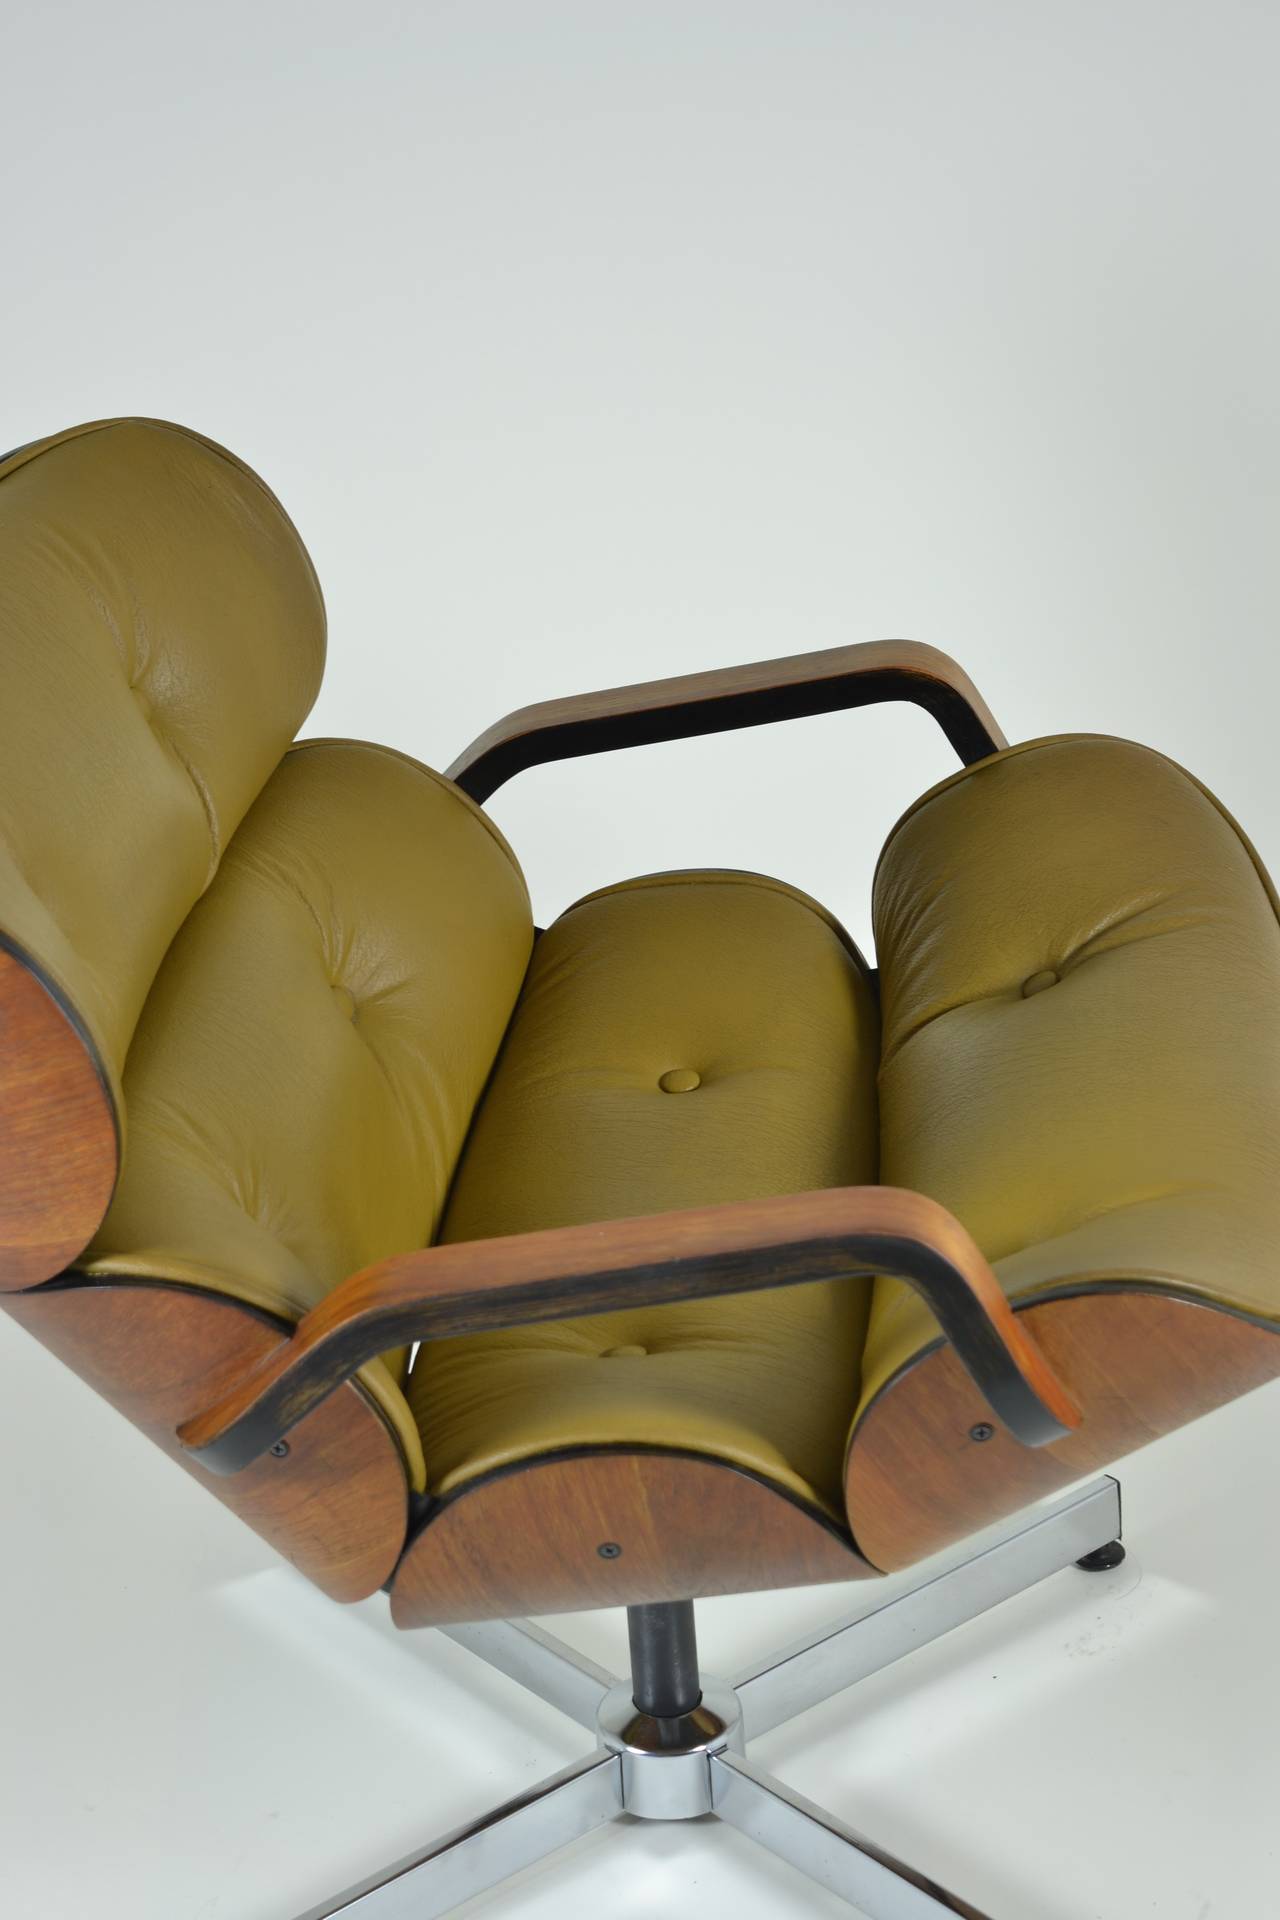 Classic bentwood construction with sculptural form a great armchair very comfortable. Original 